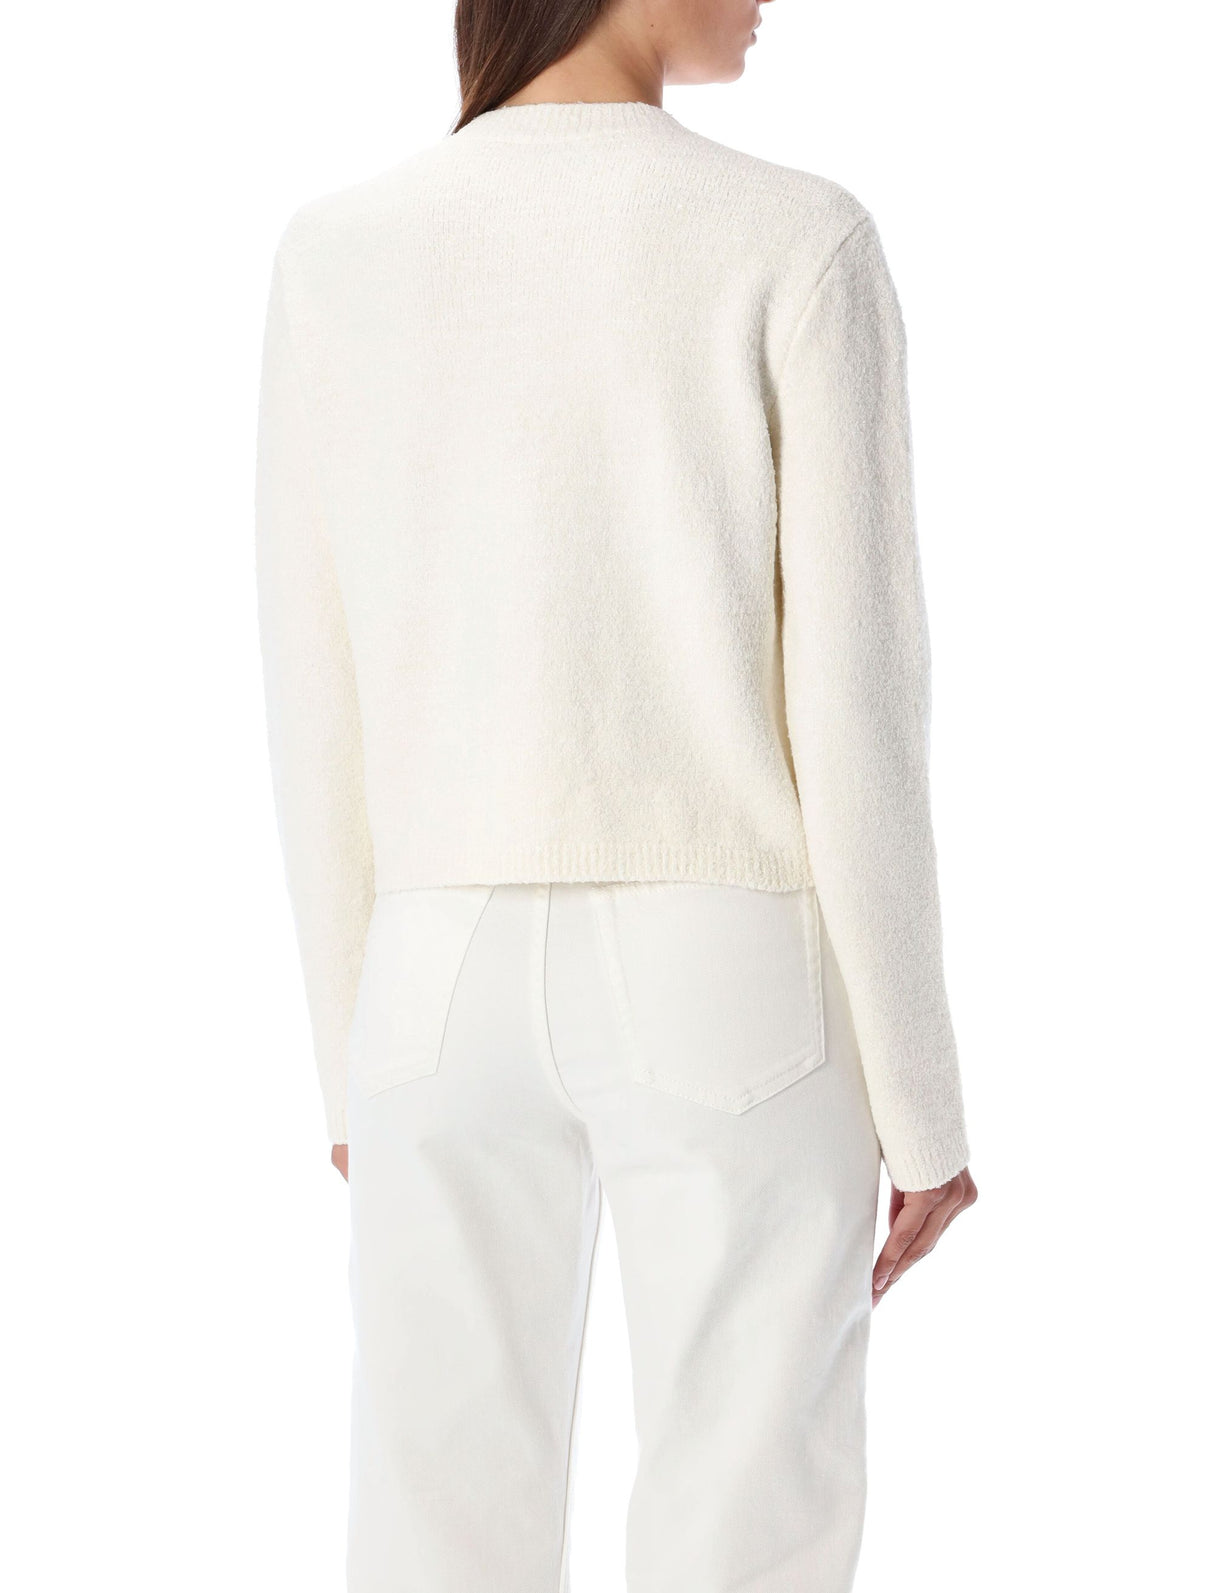 LANVIN Embroidered Knit Cardigan for Women - Classic and Chic